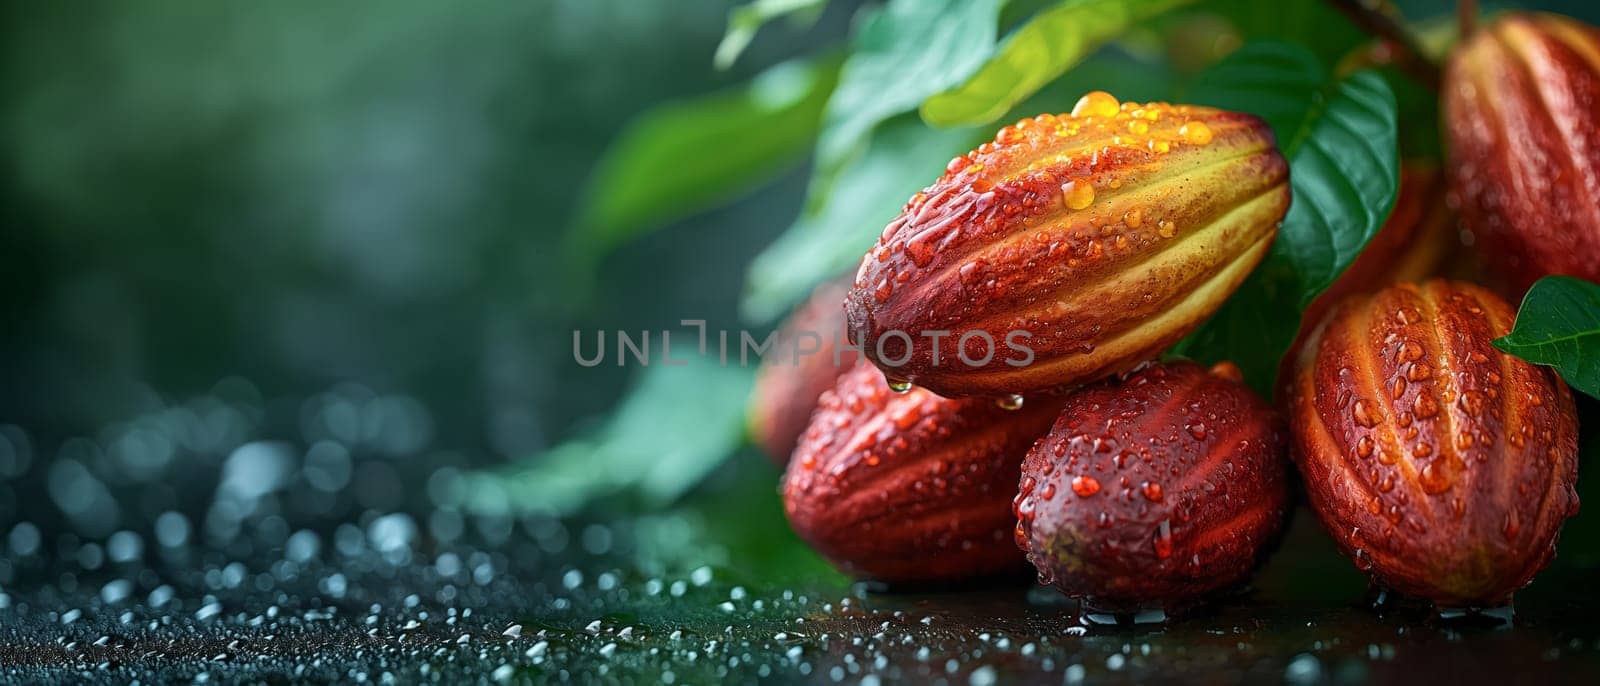 Abstract background with cocoa beans with leaves. Selective focus.